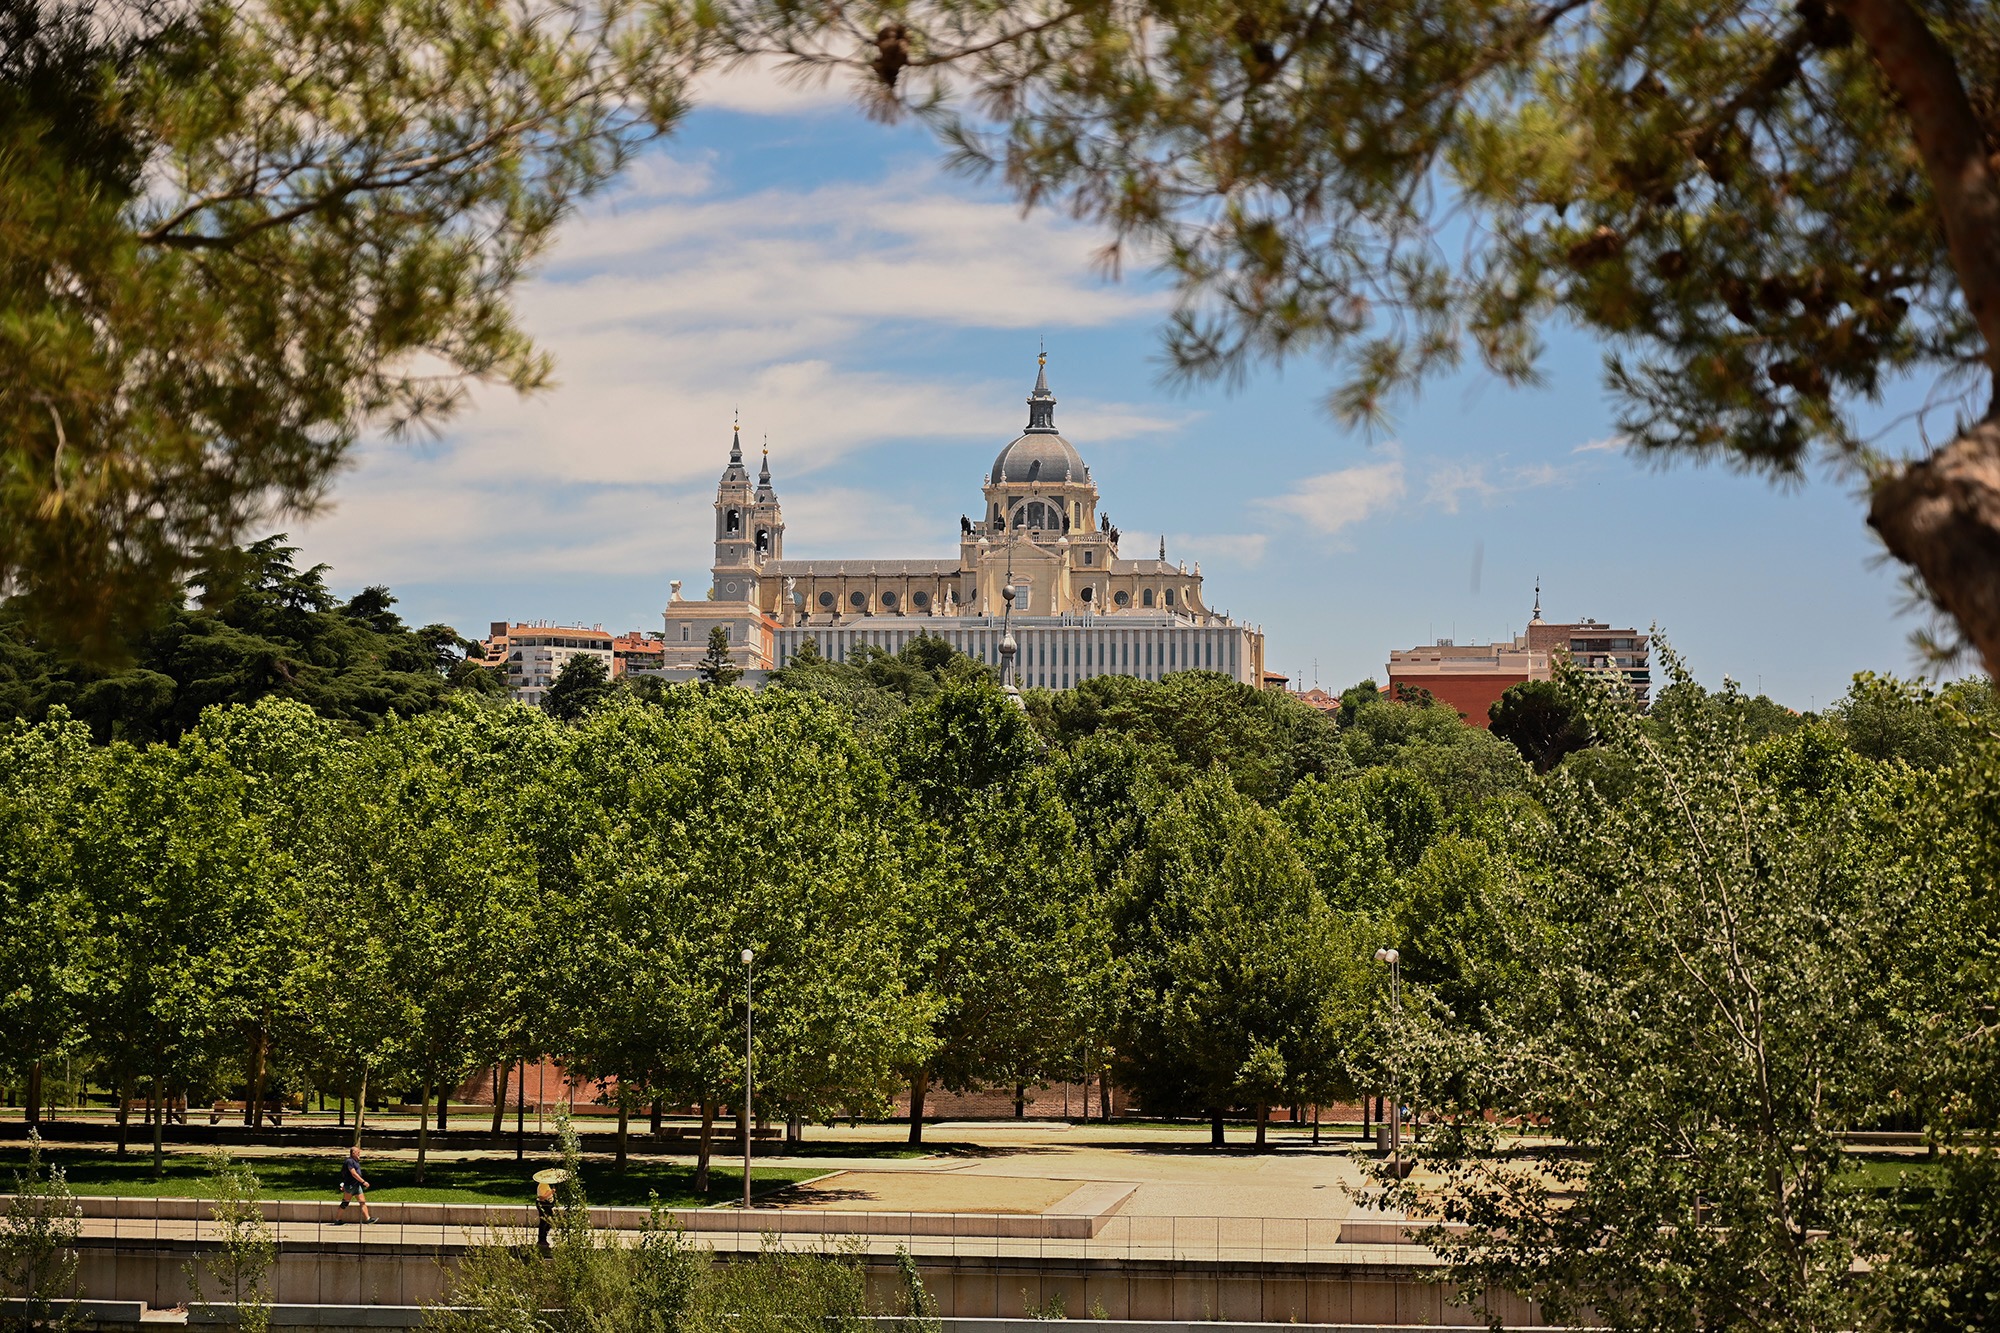 Why visit Madrid? My guide to the capital of Spain